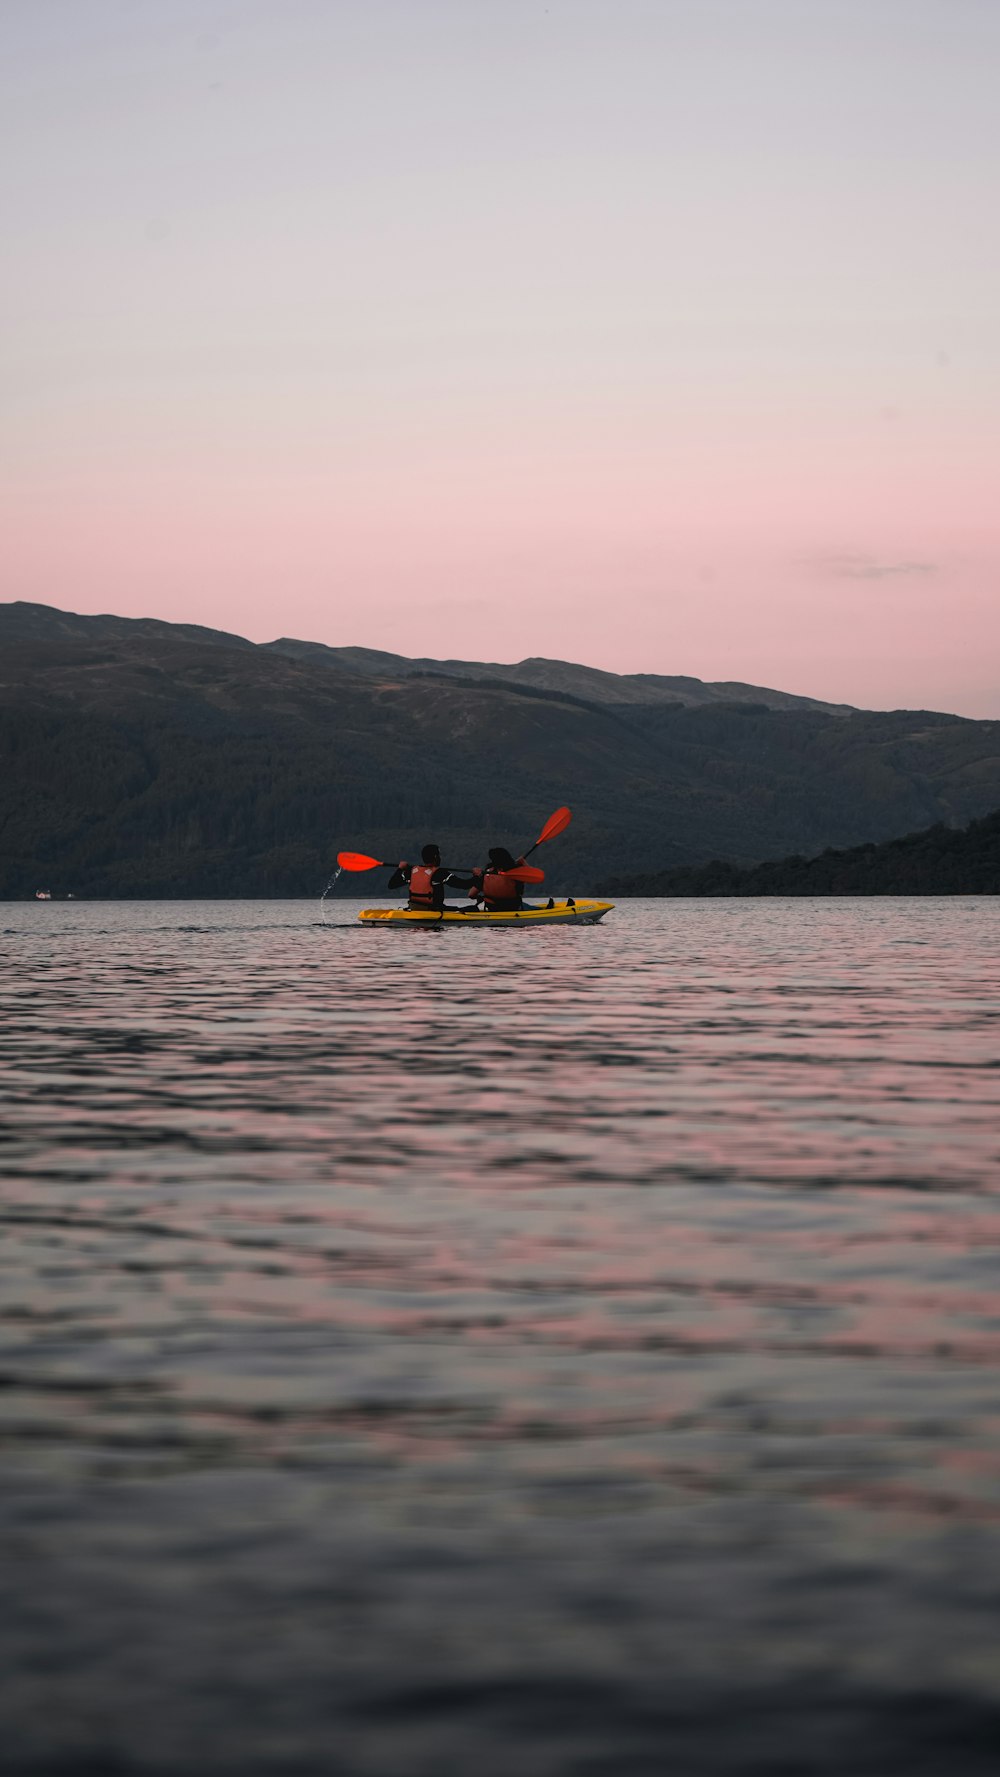 photography of two person riding kayak during daytime